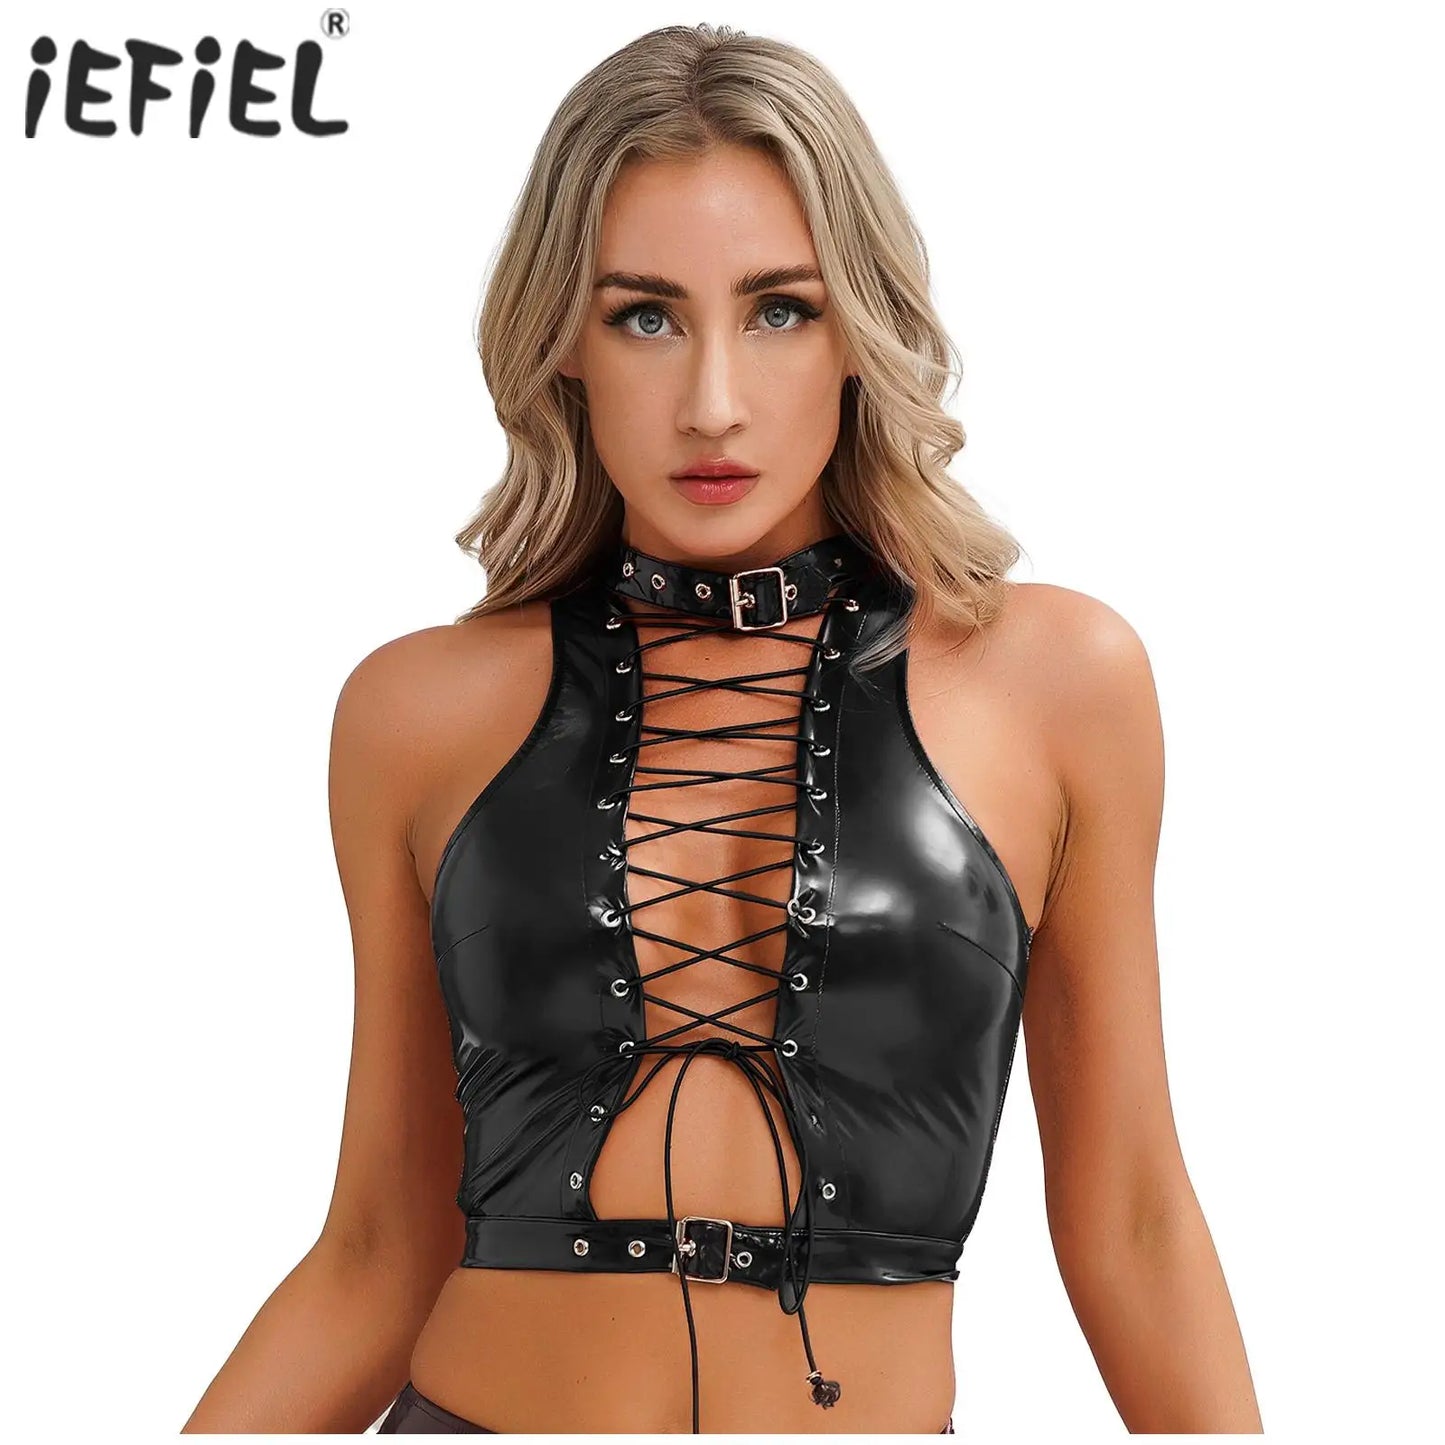 Sleeveless Crop Top for Women Adjustable Buckle at Neckline Hem Hollow Out Eyelet Lace-Up Vest Tank Tops Gothic Punk Camis Tanks